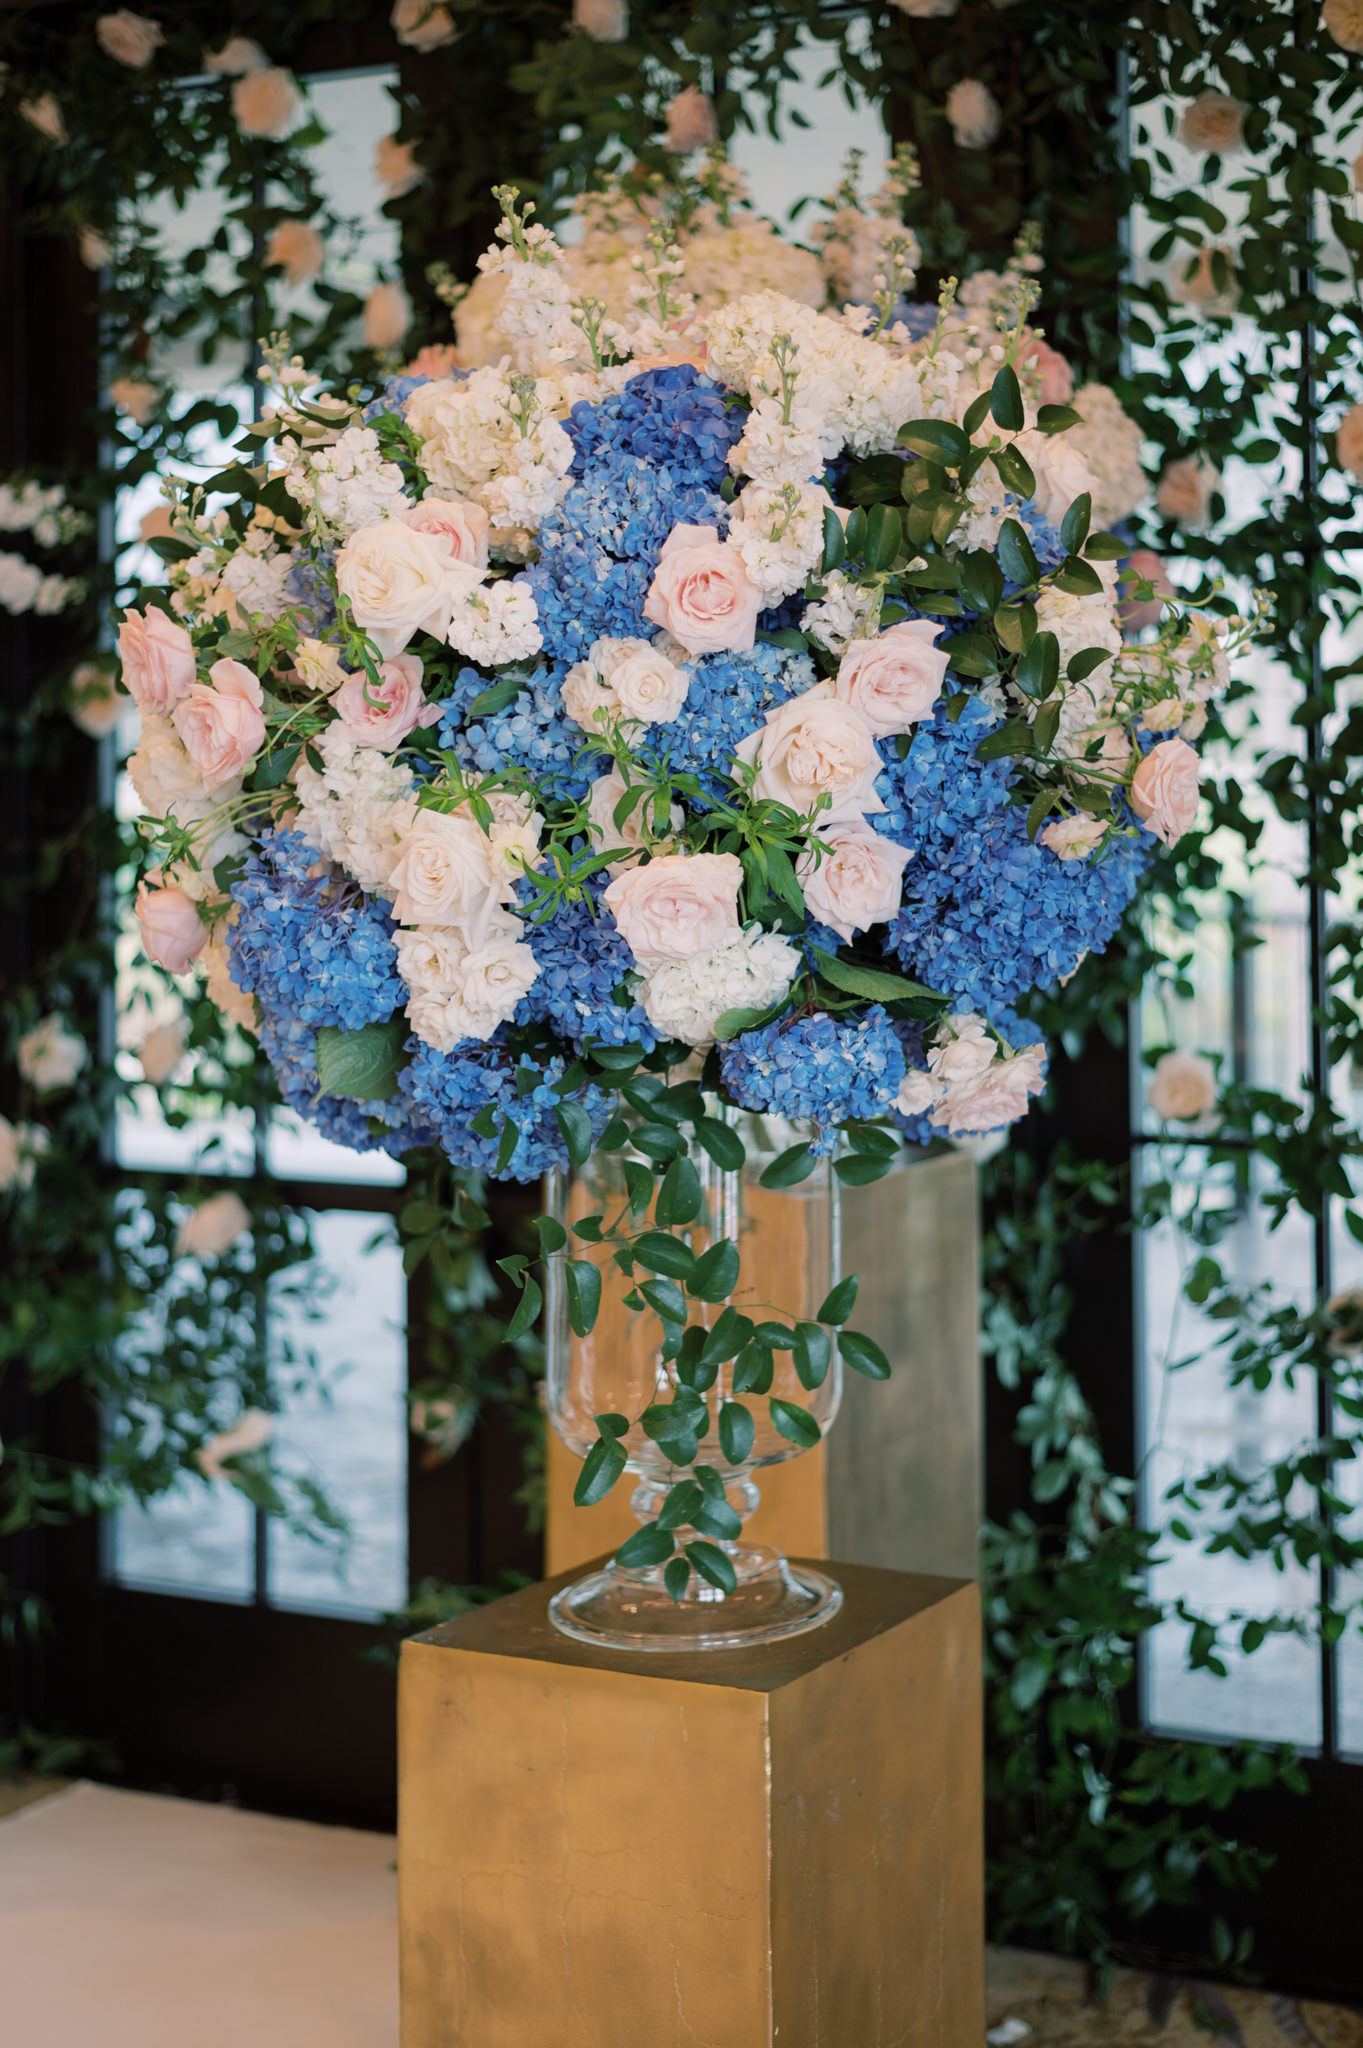 Beautiful flowers in blue, pink, and white colors. NYC wedding venue image by Jenny Fu Studio